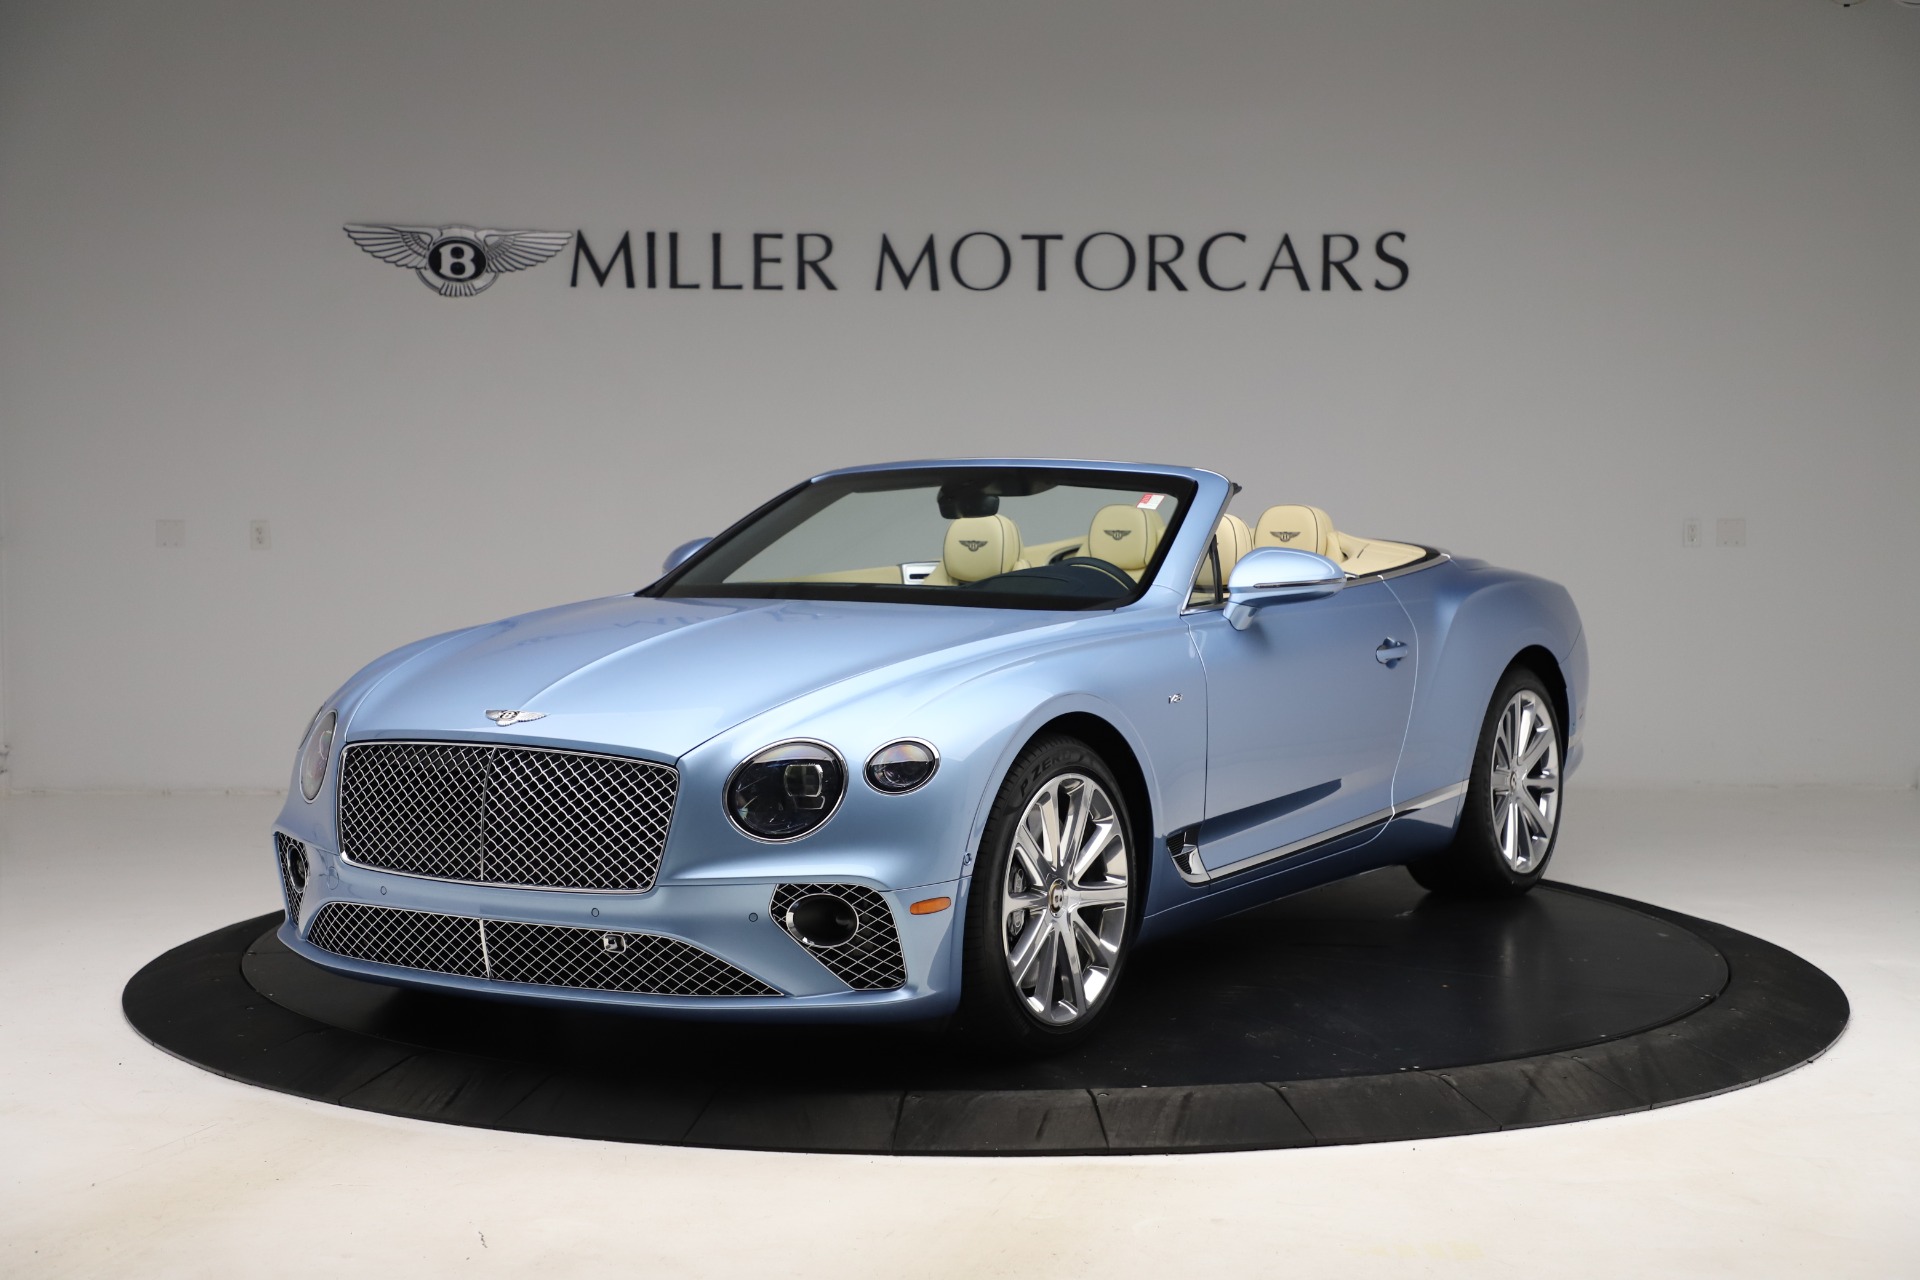 New 2020 Bentley Continental GTC V8 for sale Sold at Maserati of Westport in Westport CT 06880 1